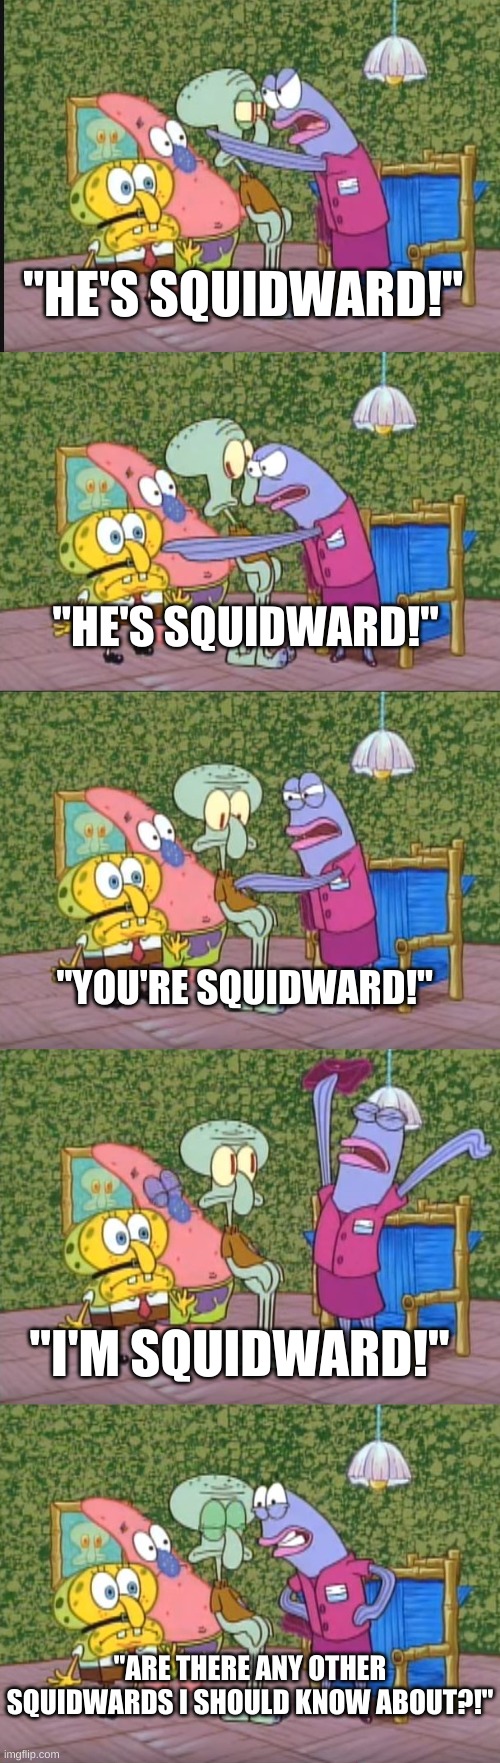 "ARE THERE ANY OTHER SQUIDWARDS I SHOULD KNOW ABOUT?!" | "HE'S SQUIDWARD!"; "HE'S SQUIDWARD!"; "YOU'RE SQUIDWARD!"; "I'M SQUIDWARD!"; "ARE THERE ANY OTHER SQUIDWARDS I SHOULD KNOW ABOUT?!" | image tagged in any other squidwards | made w/ Imgflip meme maker